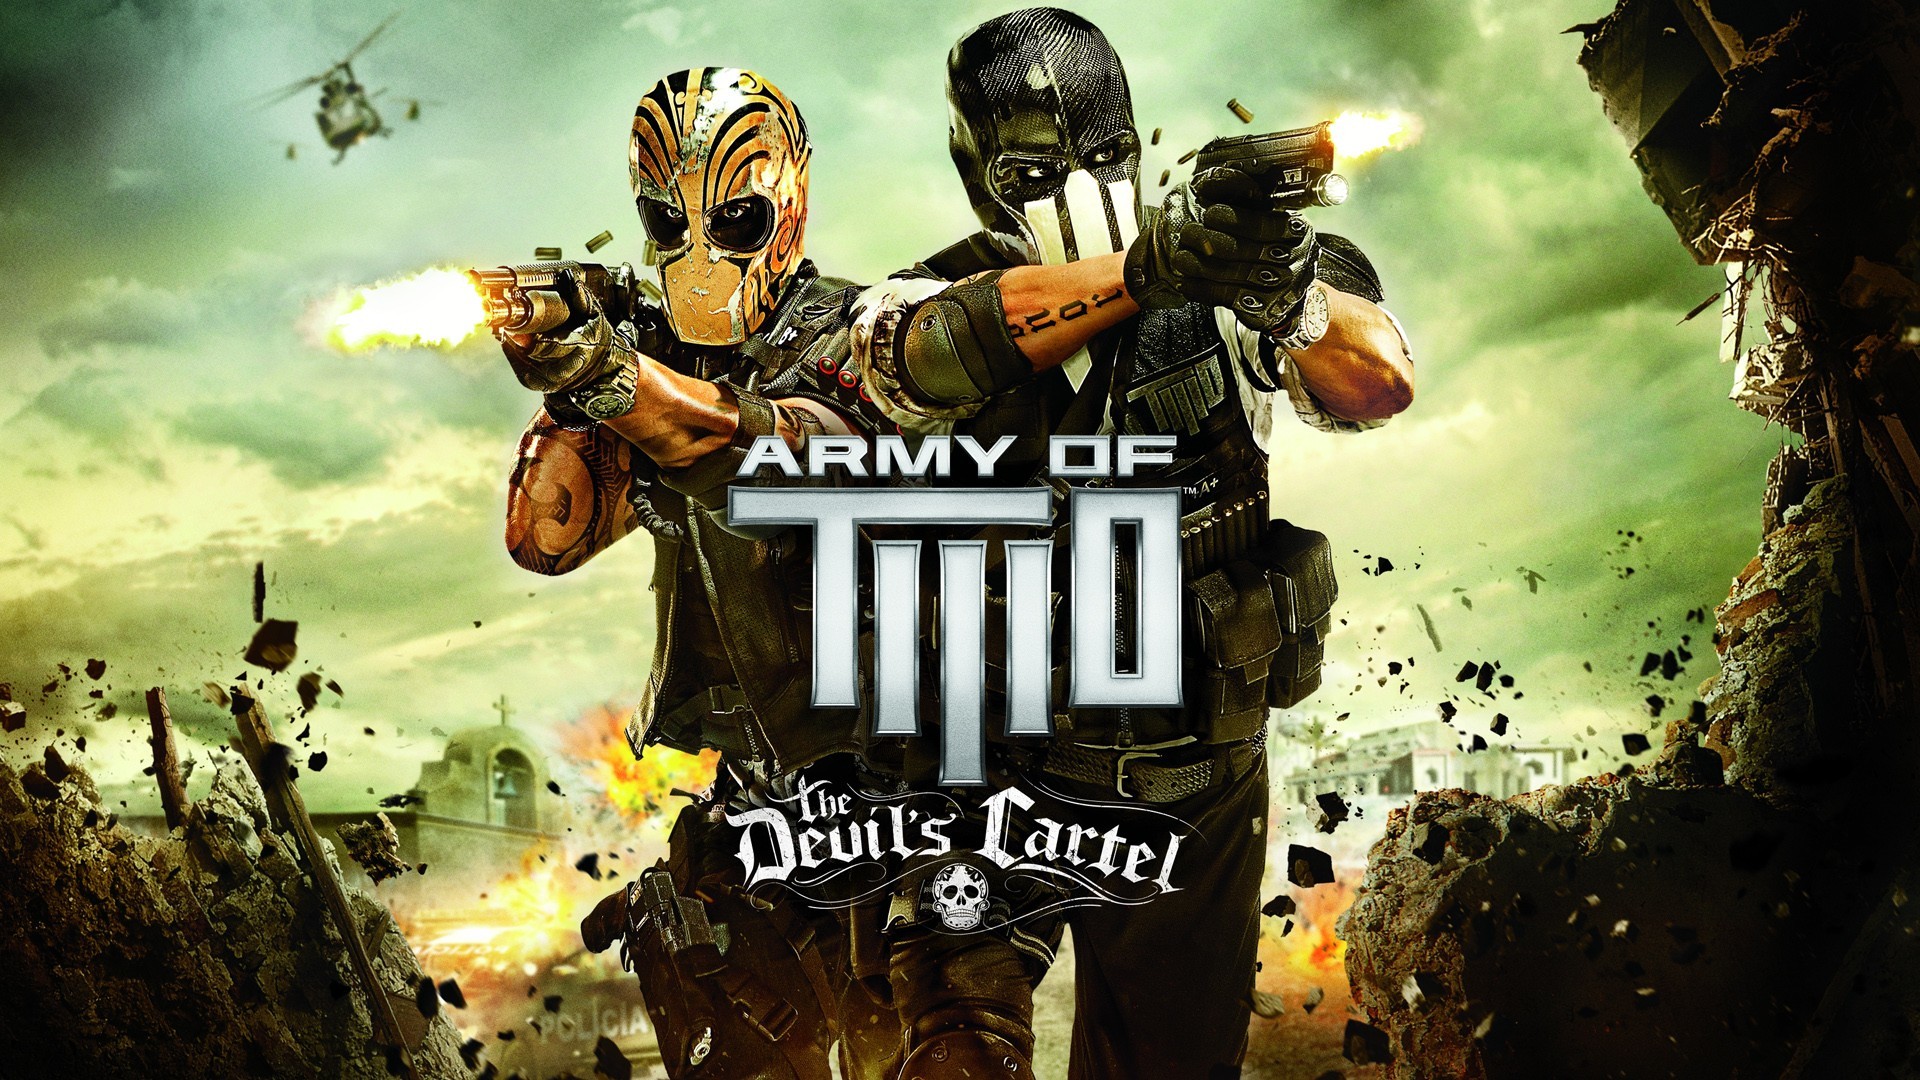 army_of_two_the_devils_cartel_2013-1920x1080.jpg